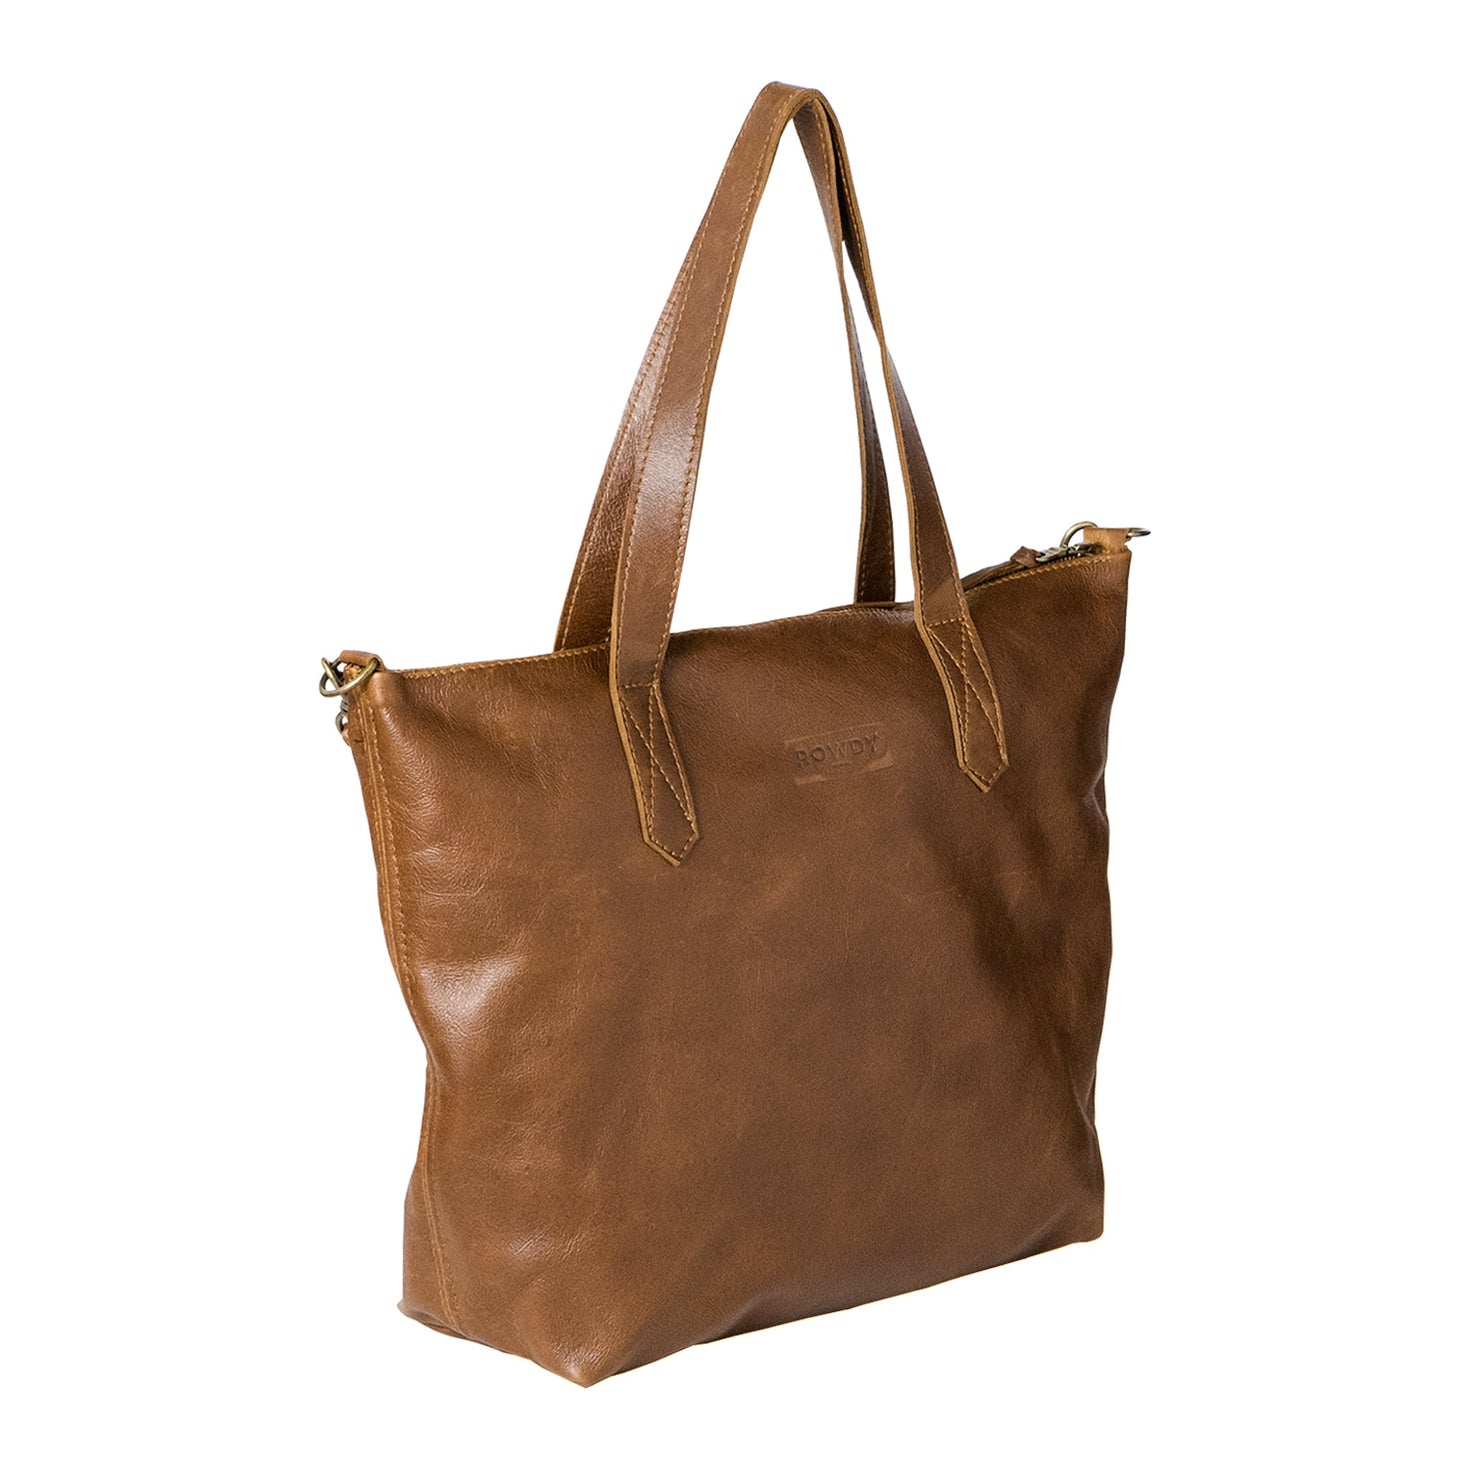 Leather Tote Crossbody – Buy Leather Totes Online| – ROWDY Bags